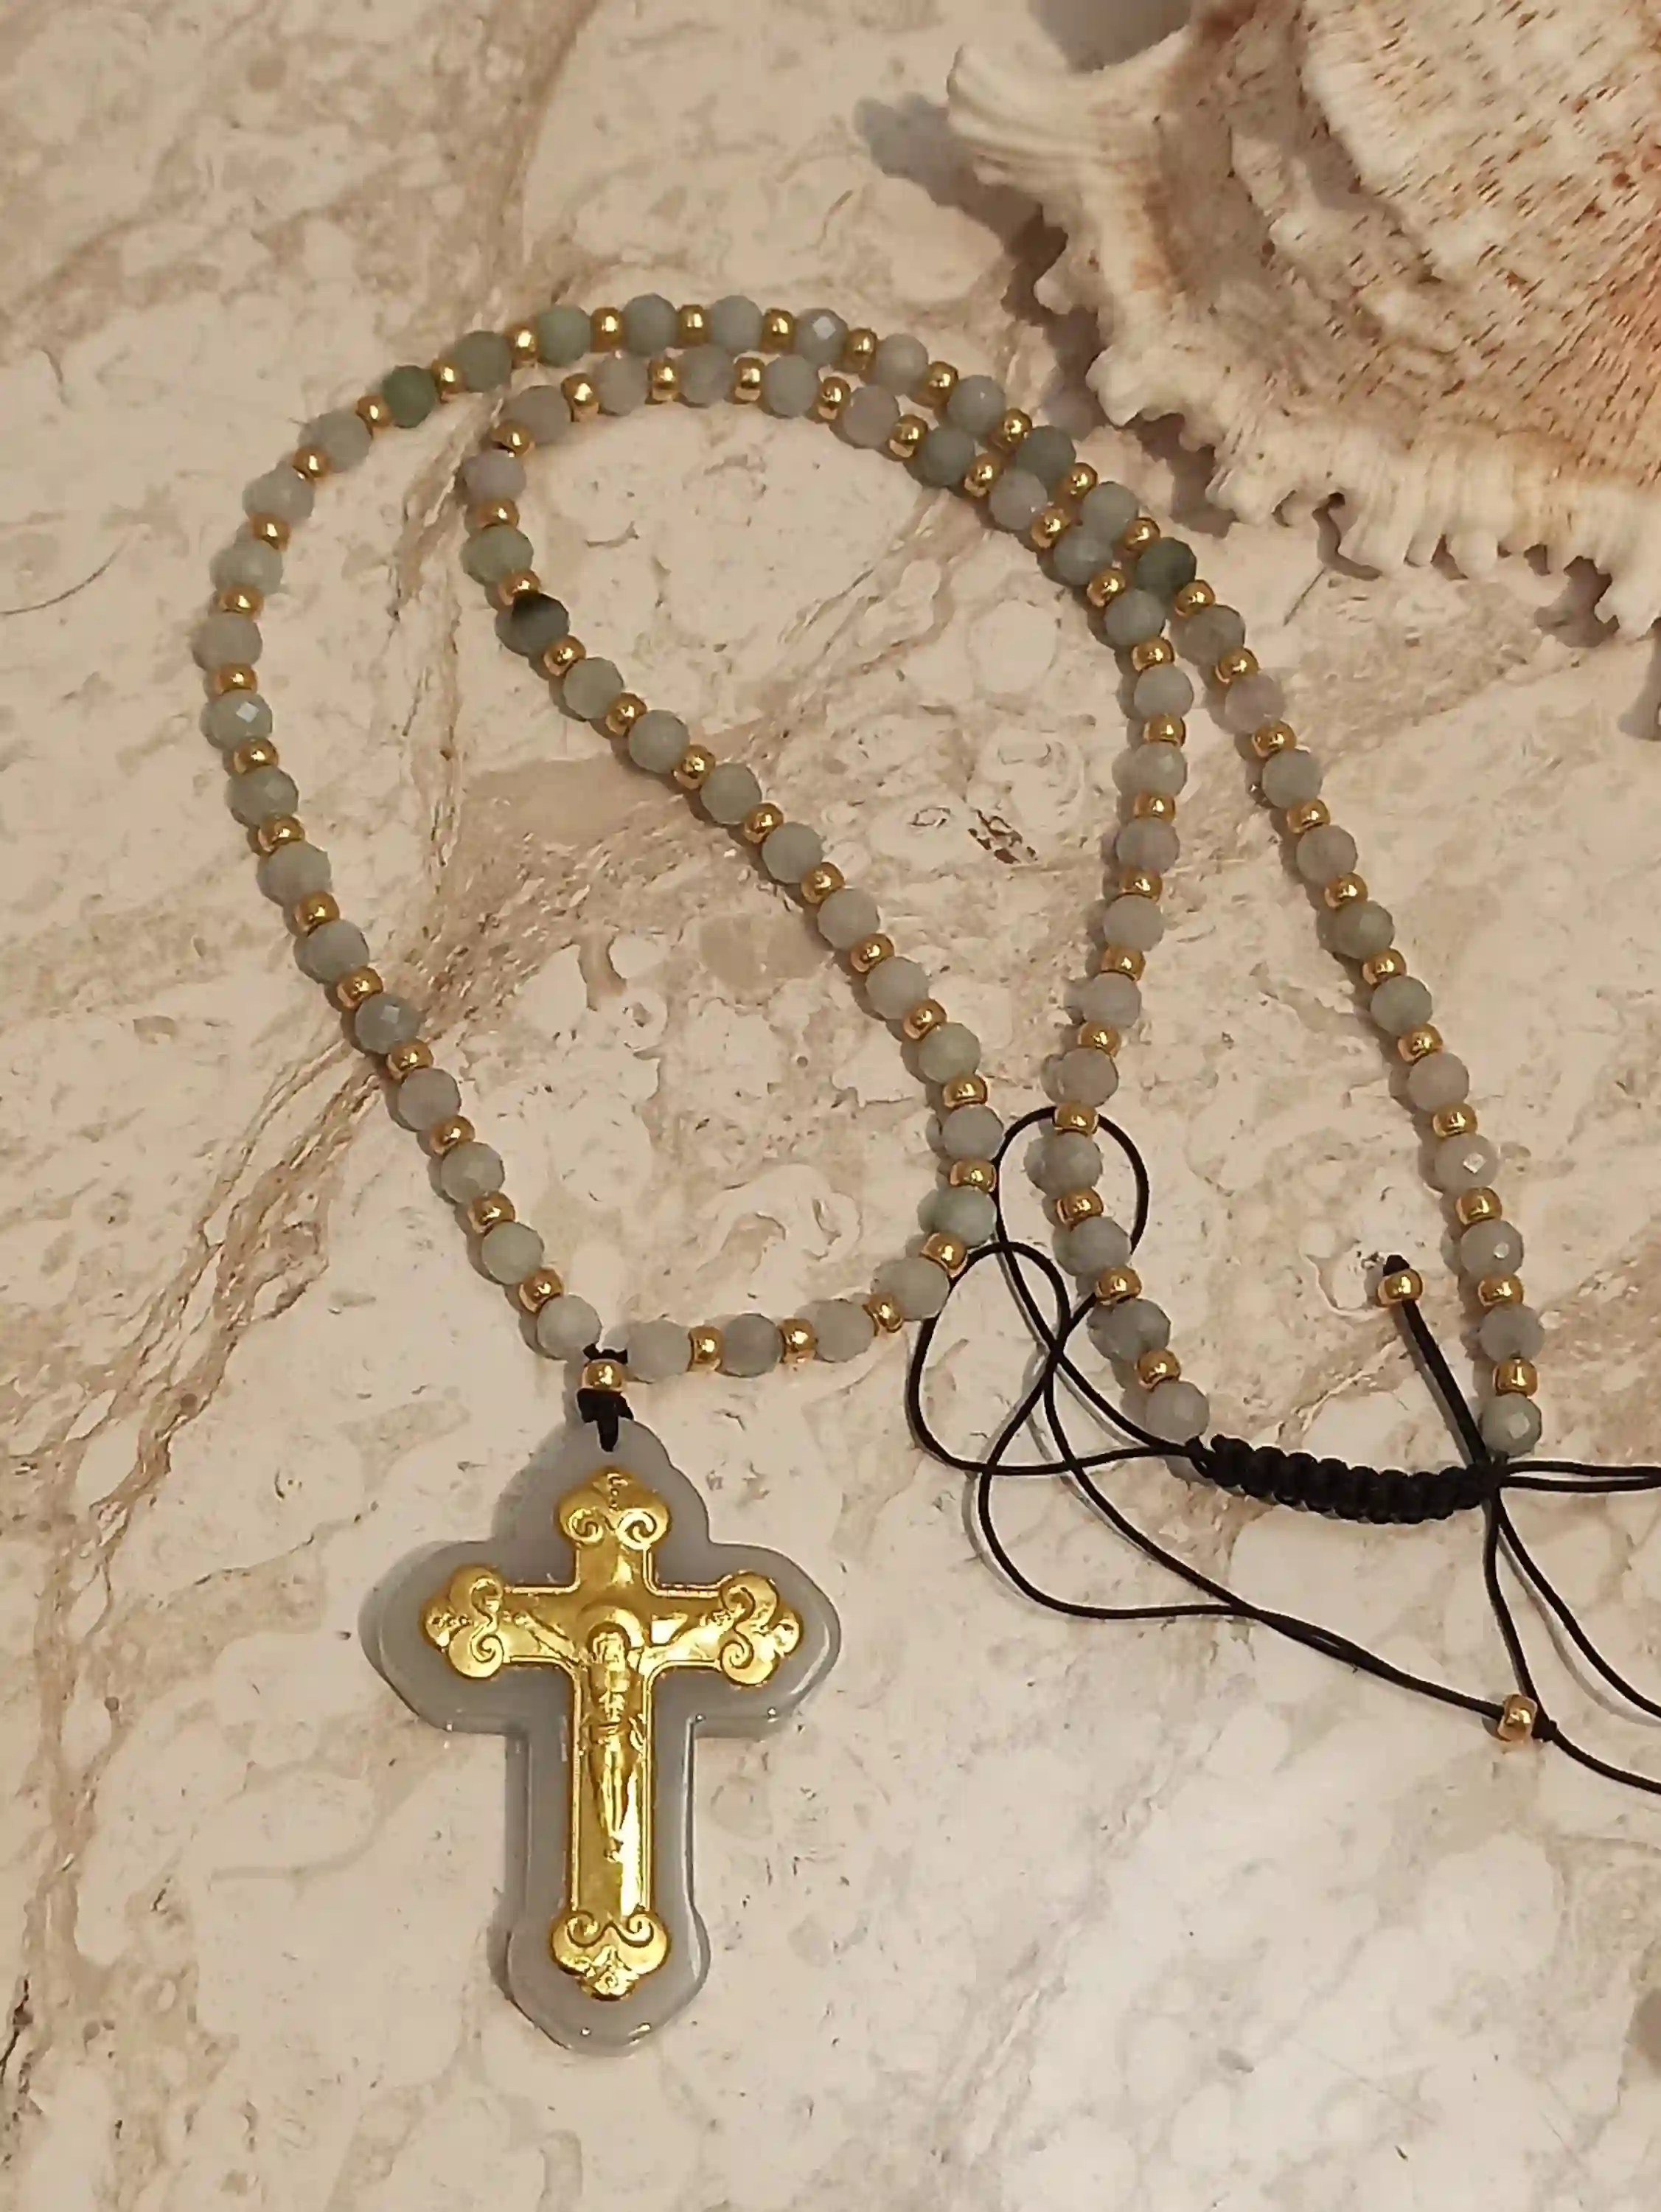 Necklace Christian Rosary Prayer SOLID 18k GOLD Cross Necklace Crucifix Christ Gift Gold Christian Jewelry Her 70 Natural Jade GEMSTONE 4mm 